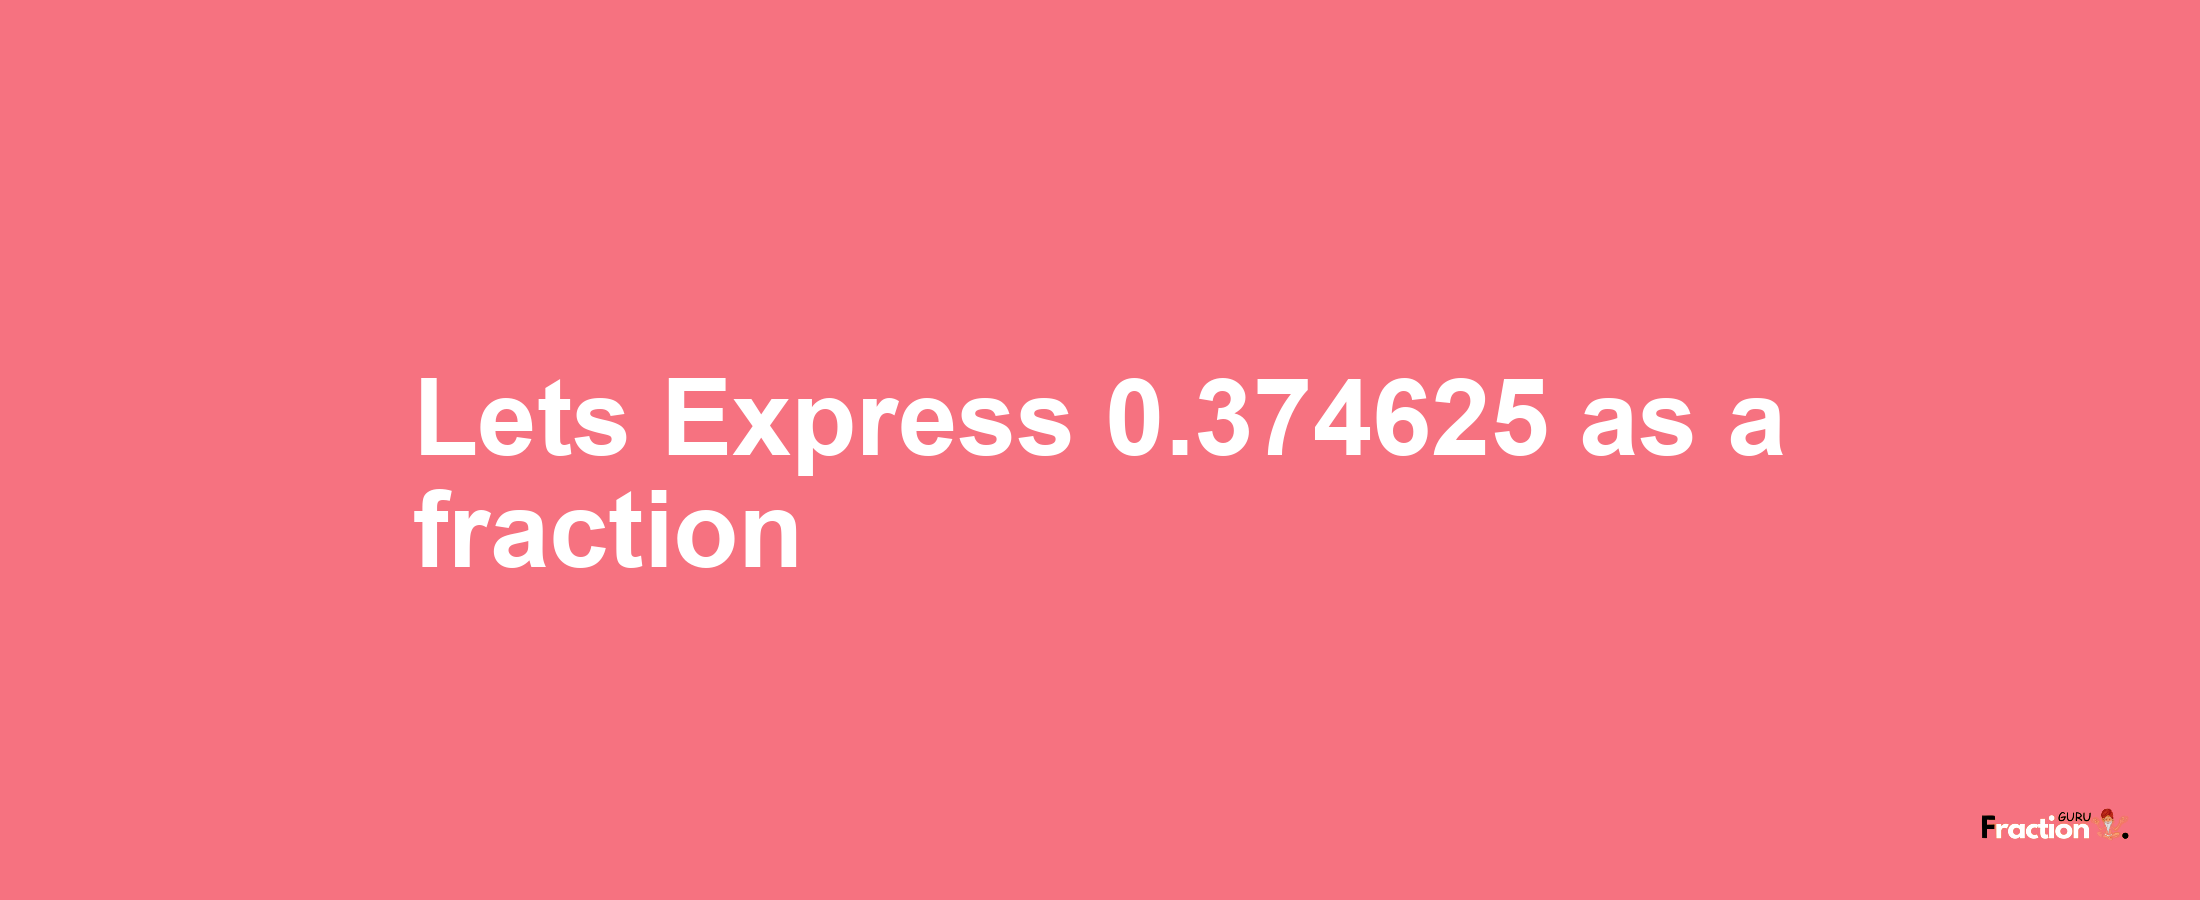 Lets Express 0.374625 as afraction